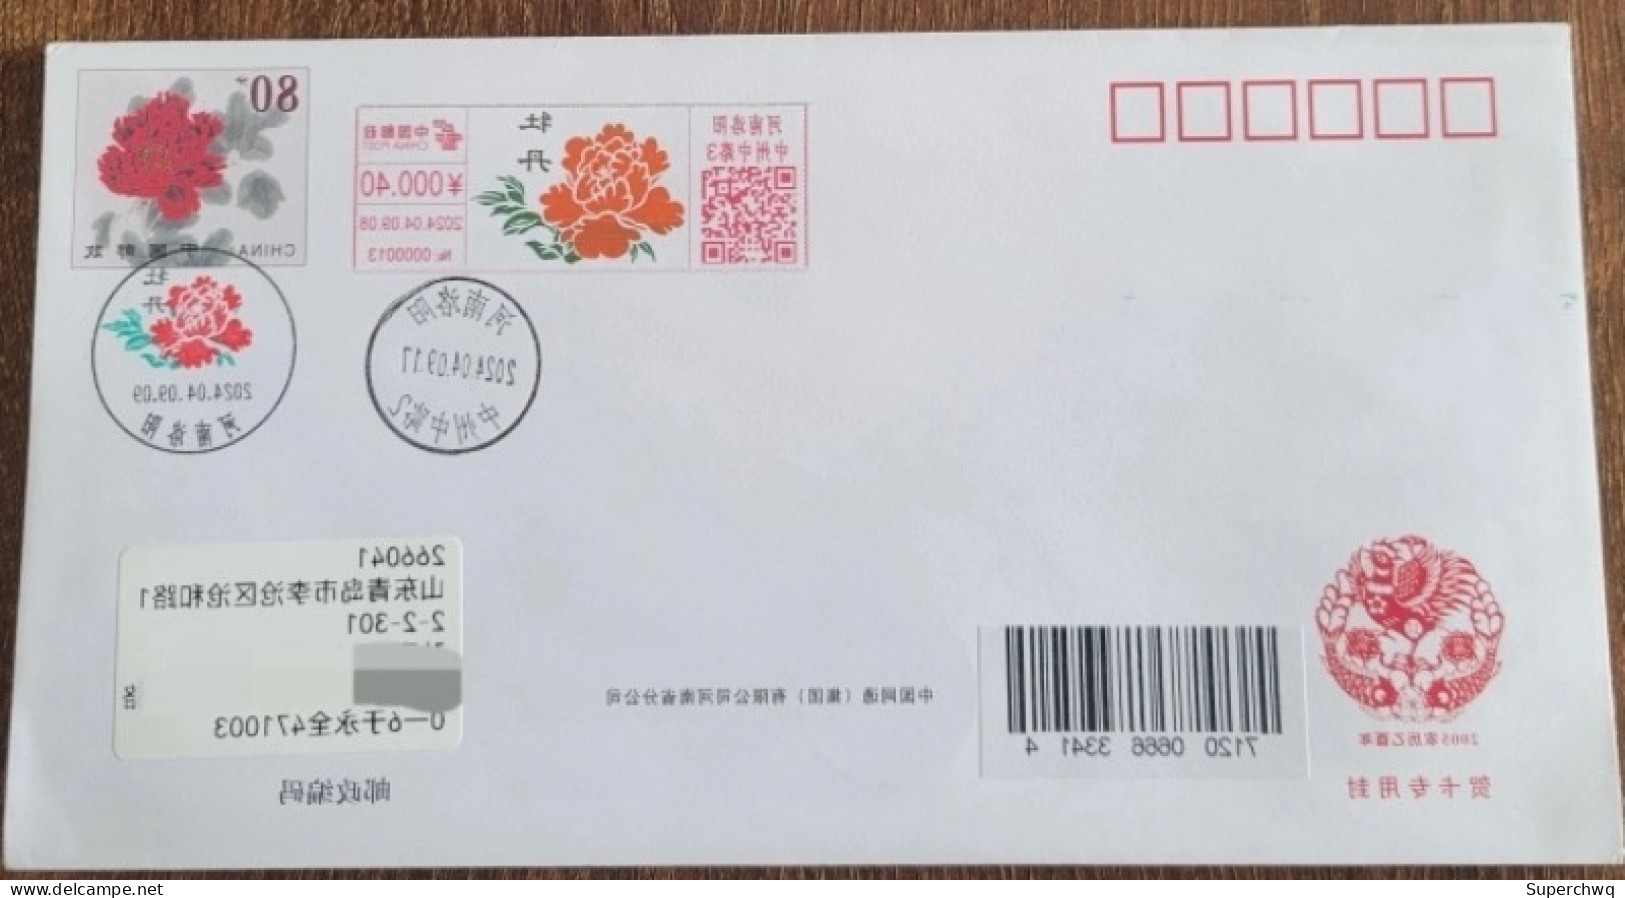 China Cover "Peony" (Luoyang, Henan) Colored Postage Stamp With The Same Theme, First Day Actual Postage Cover - Briefe